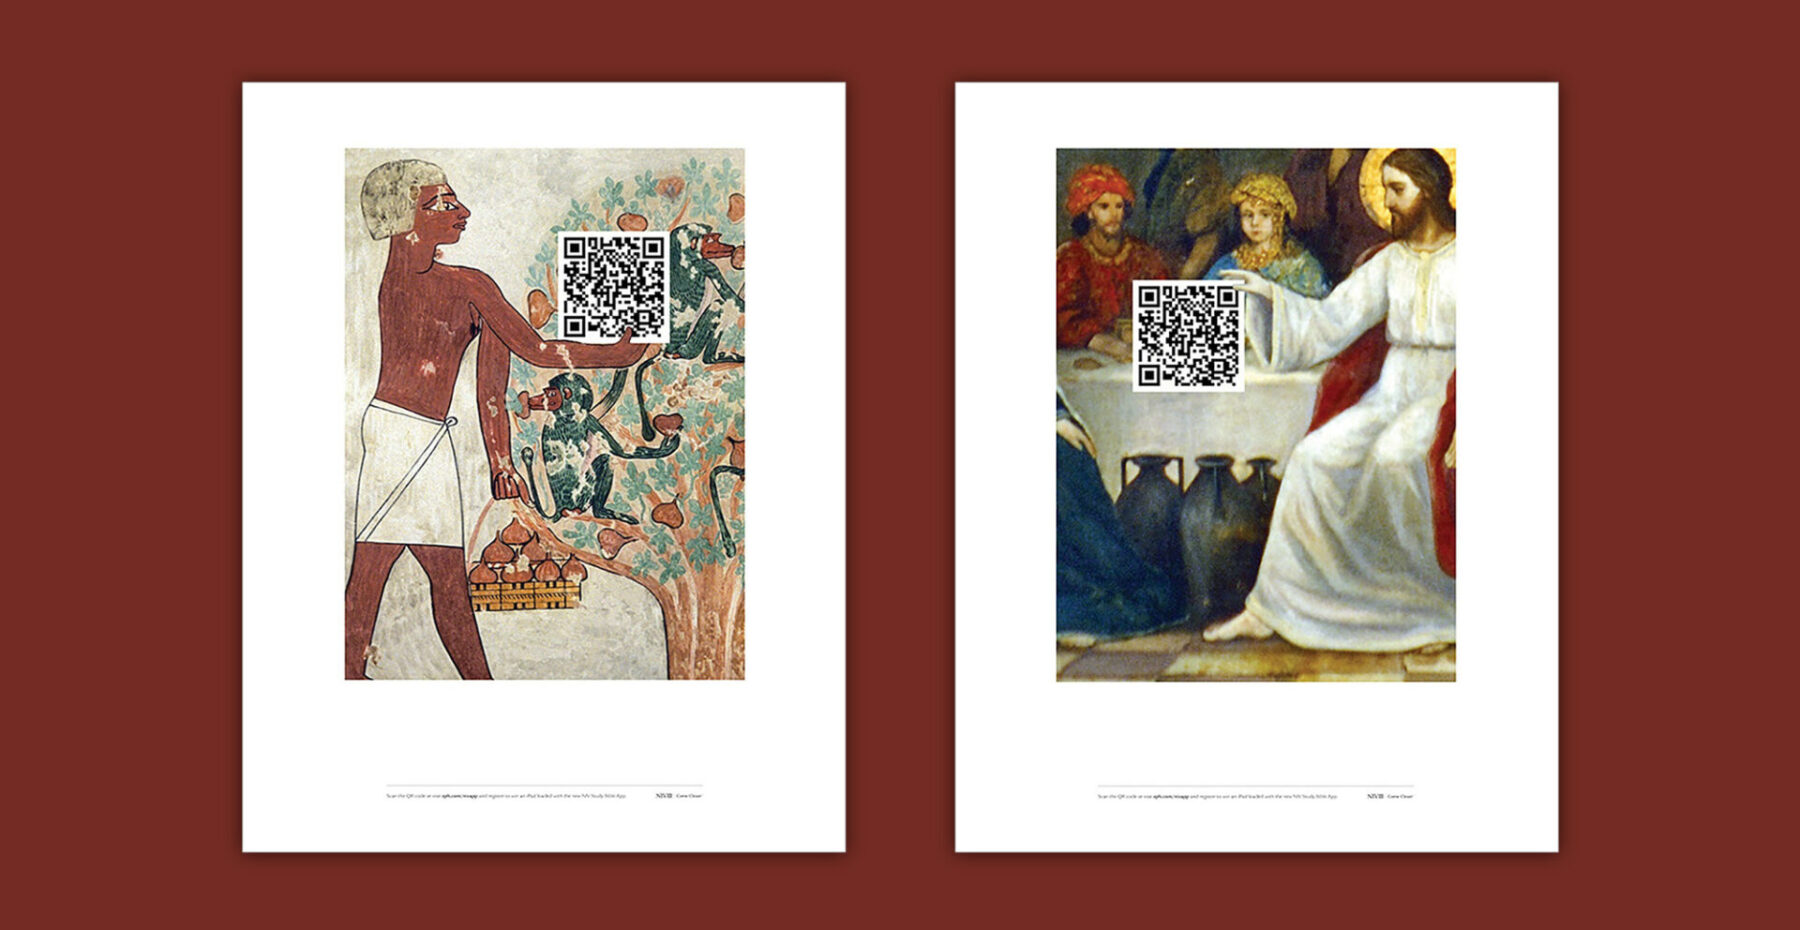 NIV print ads with paintings holding QR codes